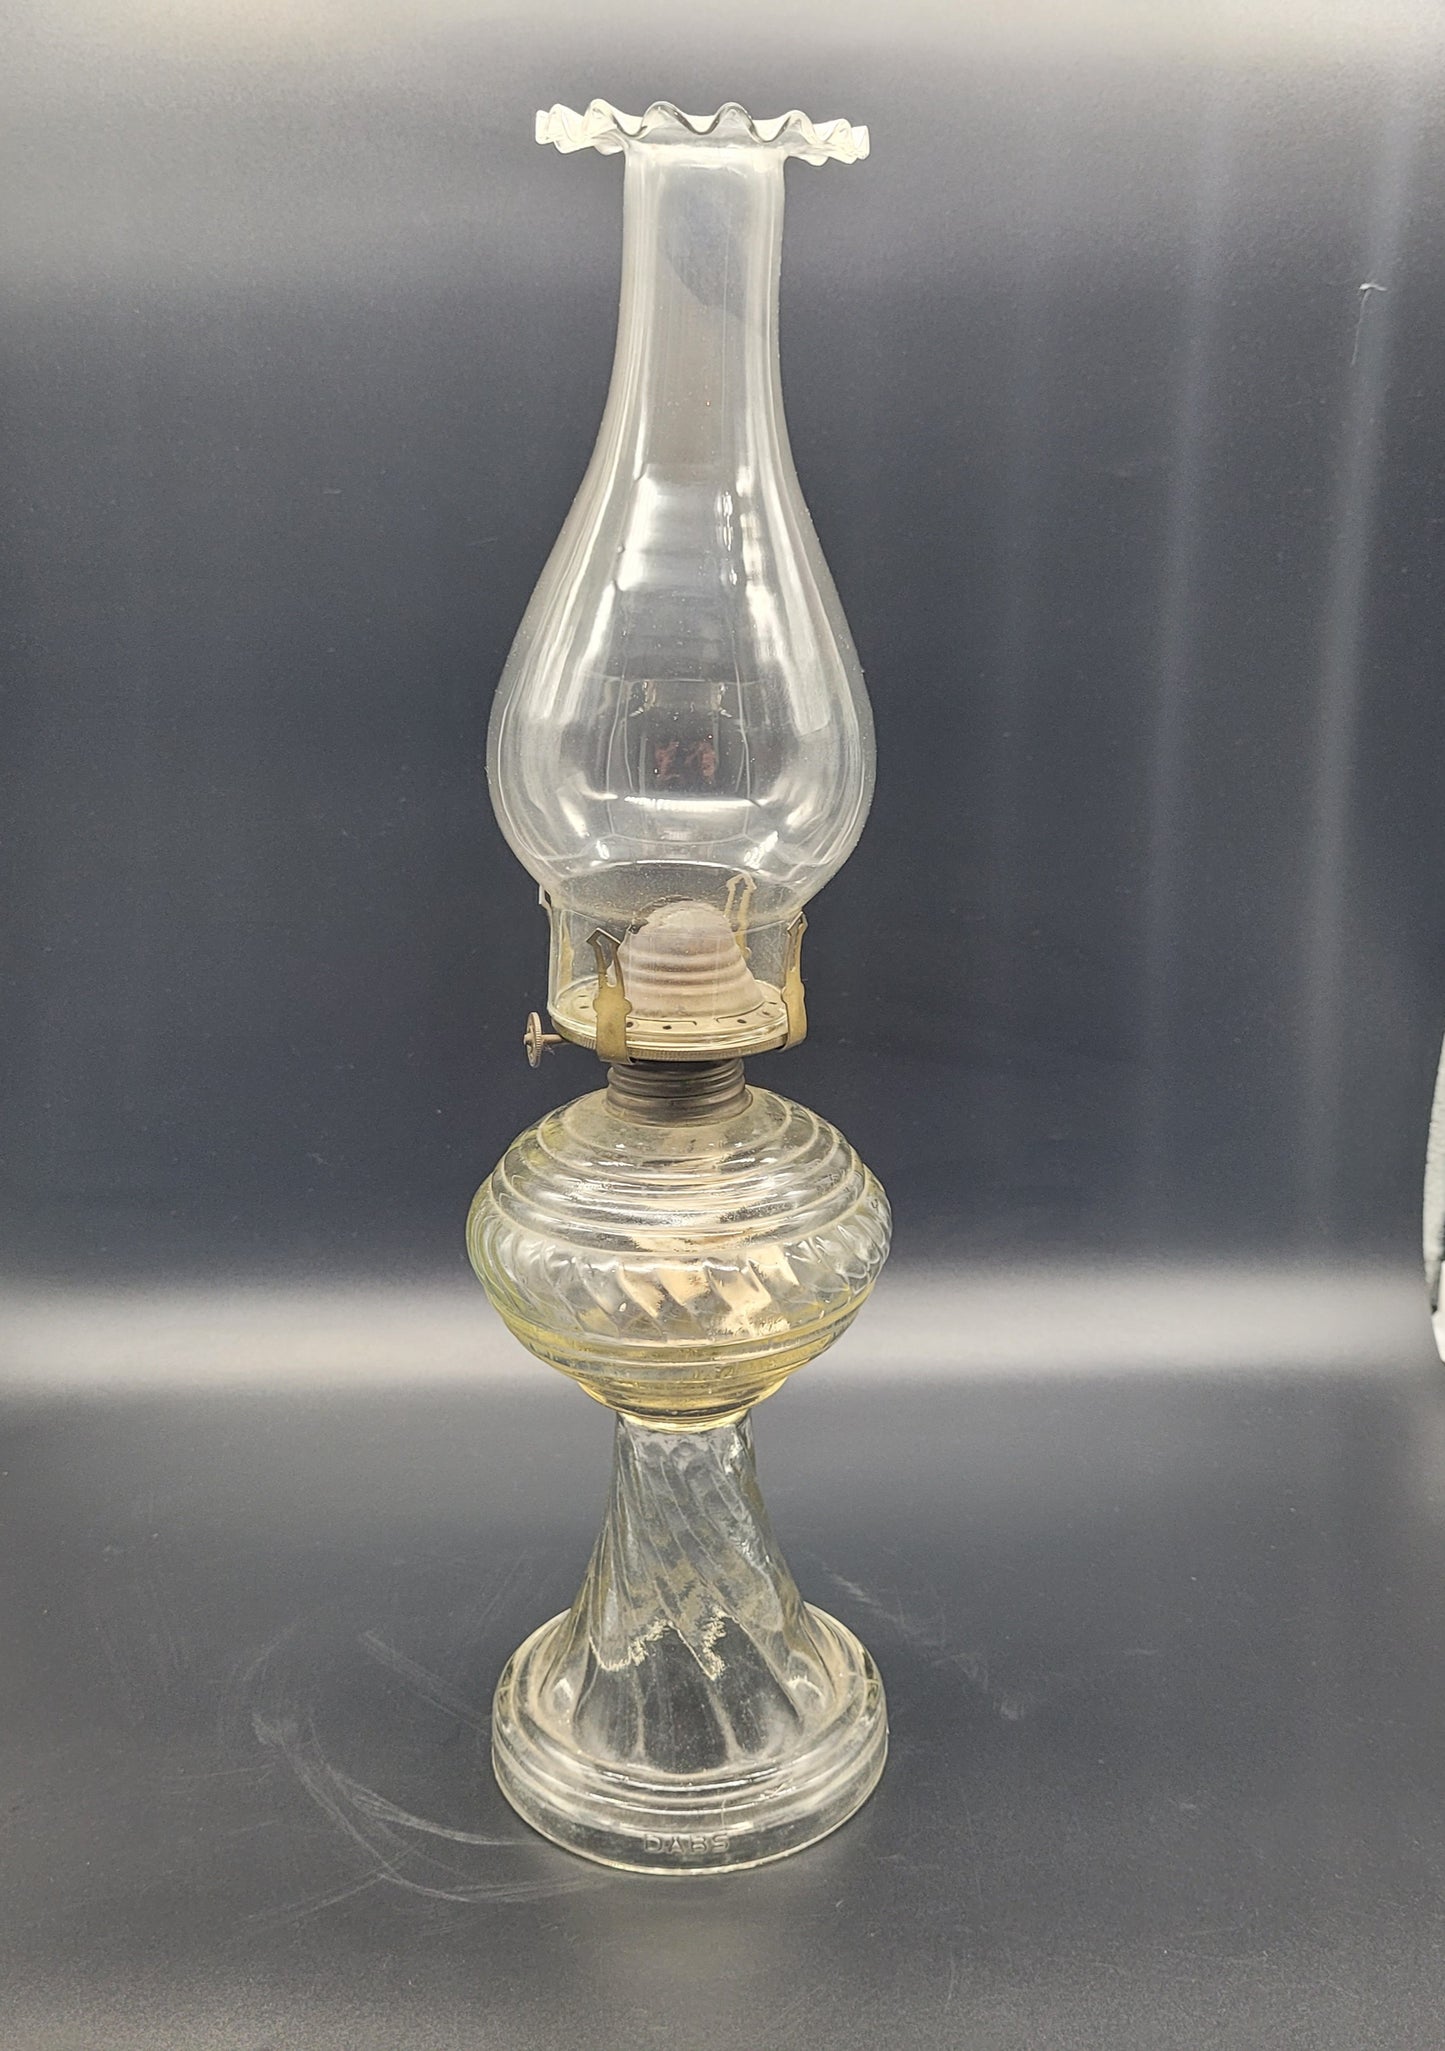 A Rare and Beautiful "Dabbs" Brand Oil Lamp late 1800s